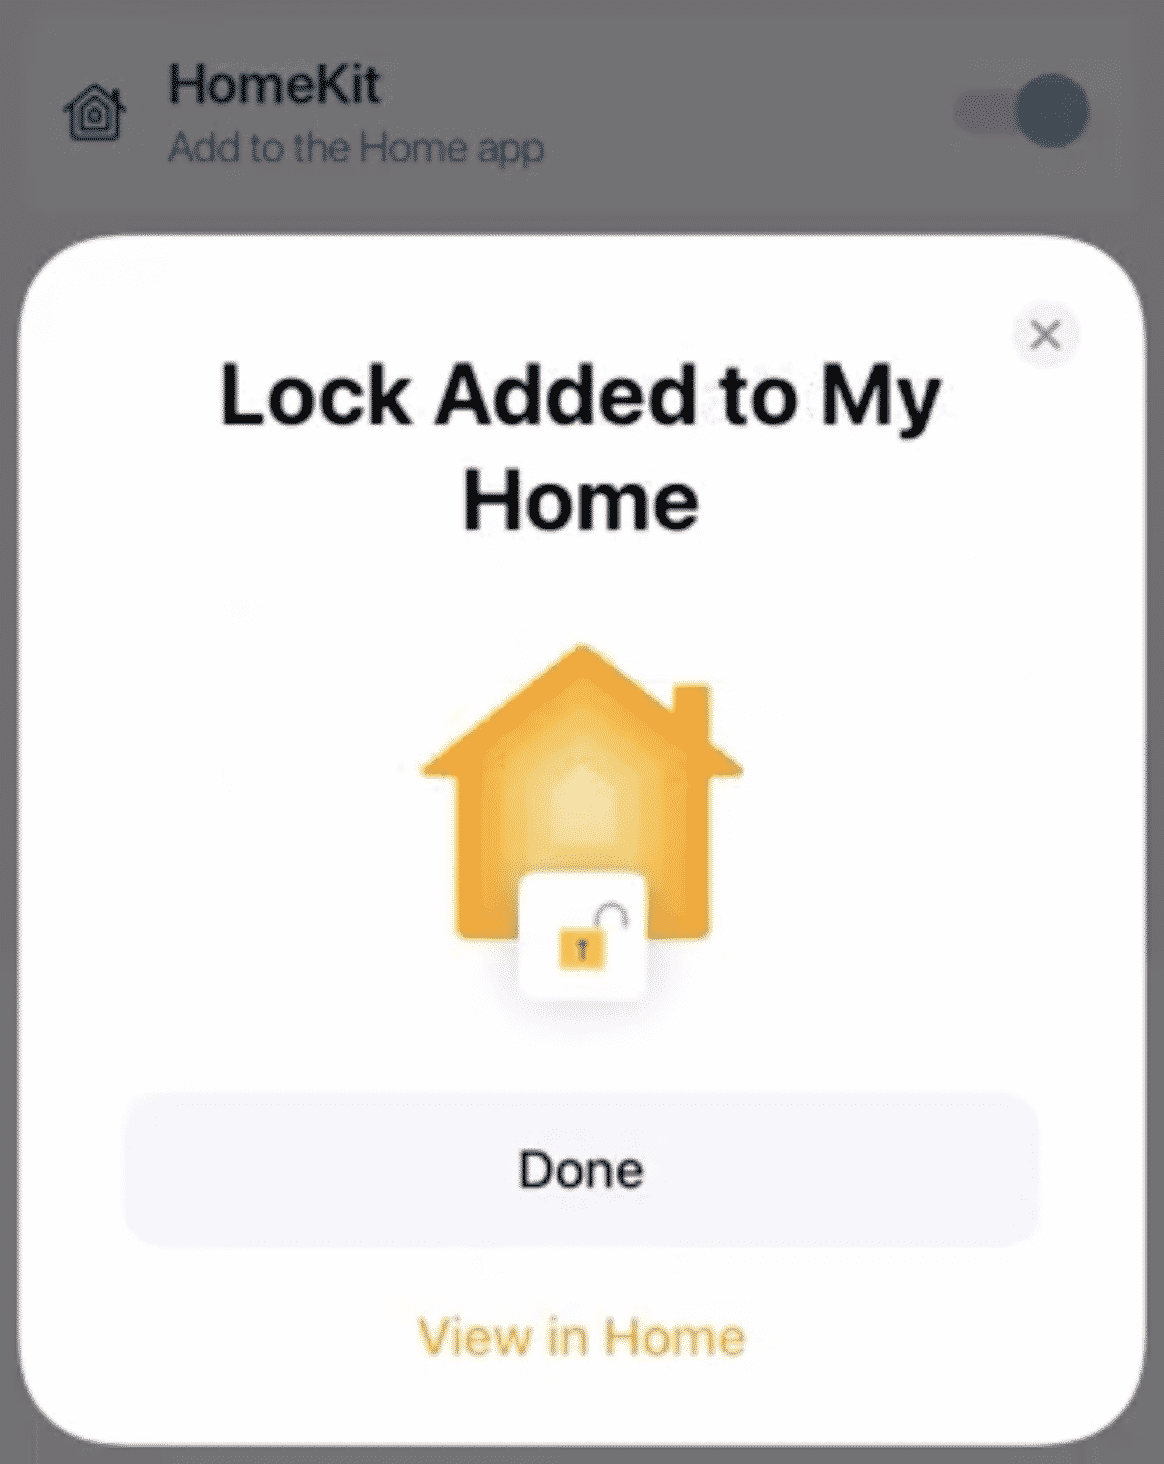 1641877491 514 tedee New firmware with HomeKit integration is available